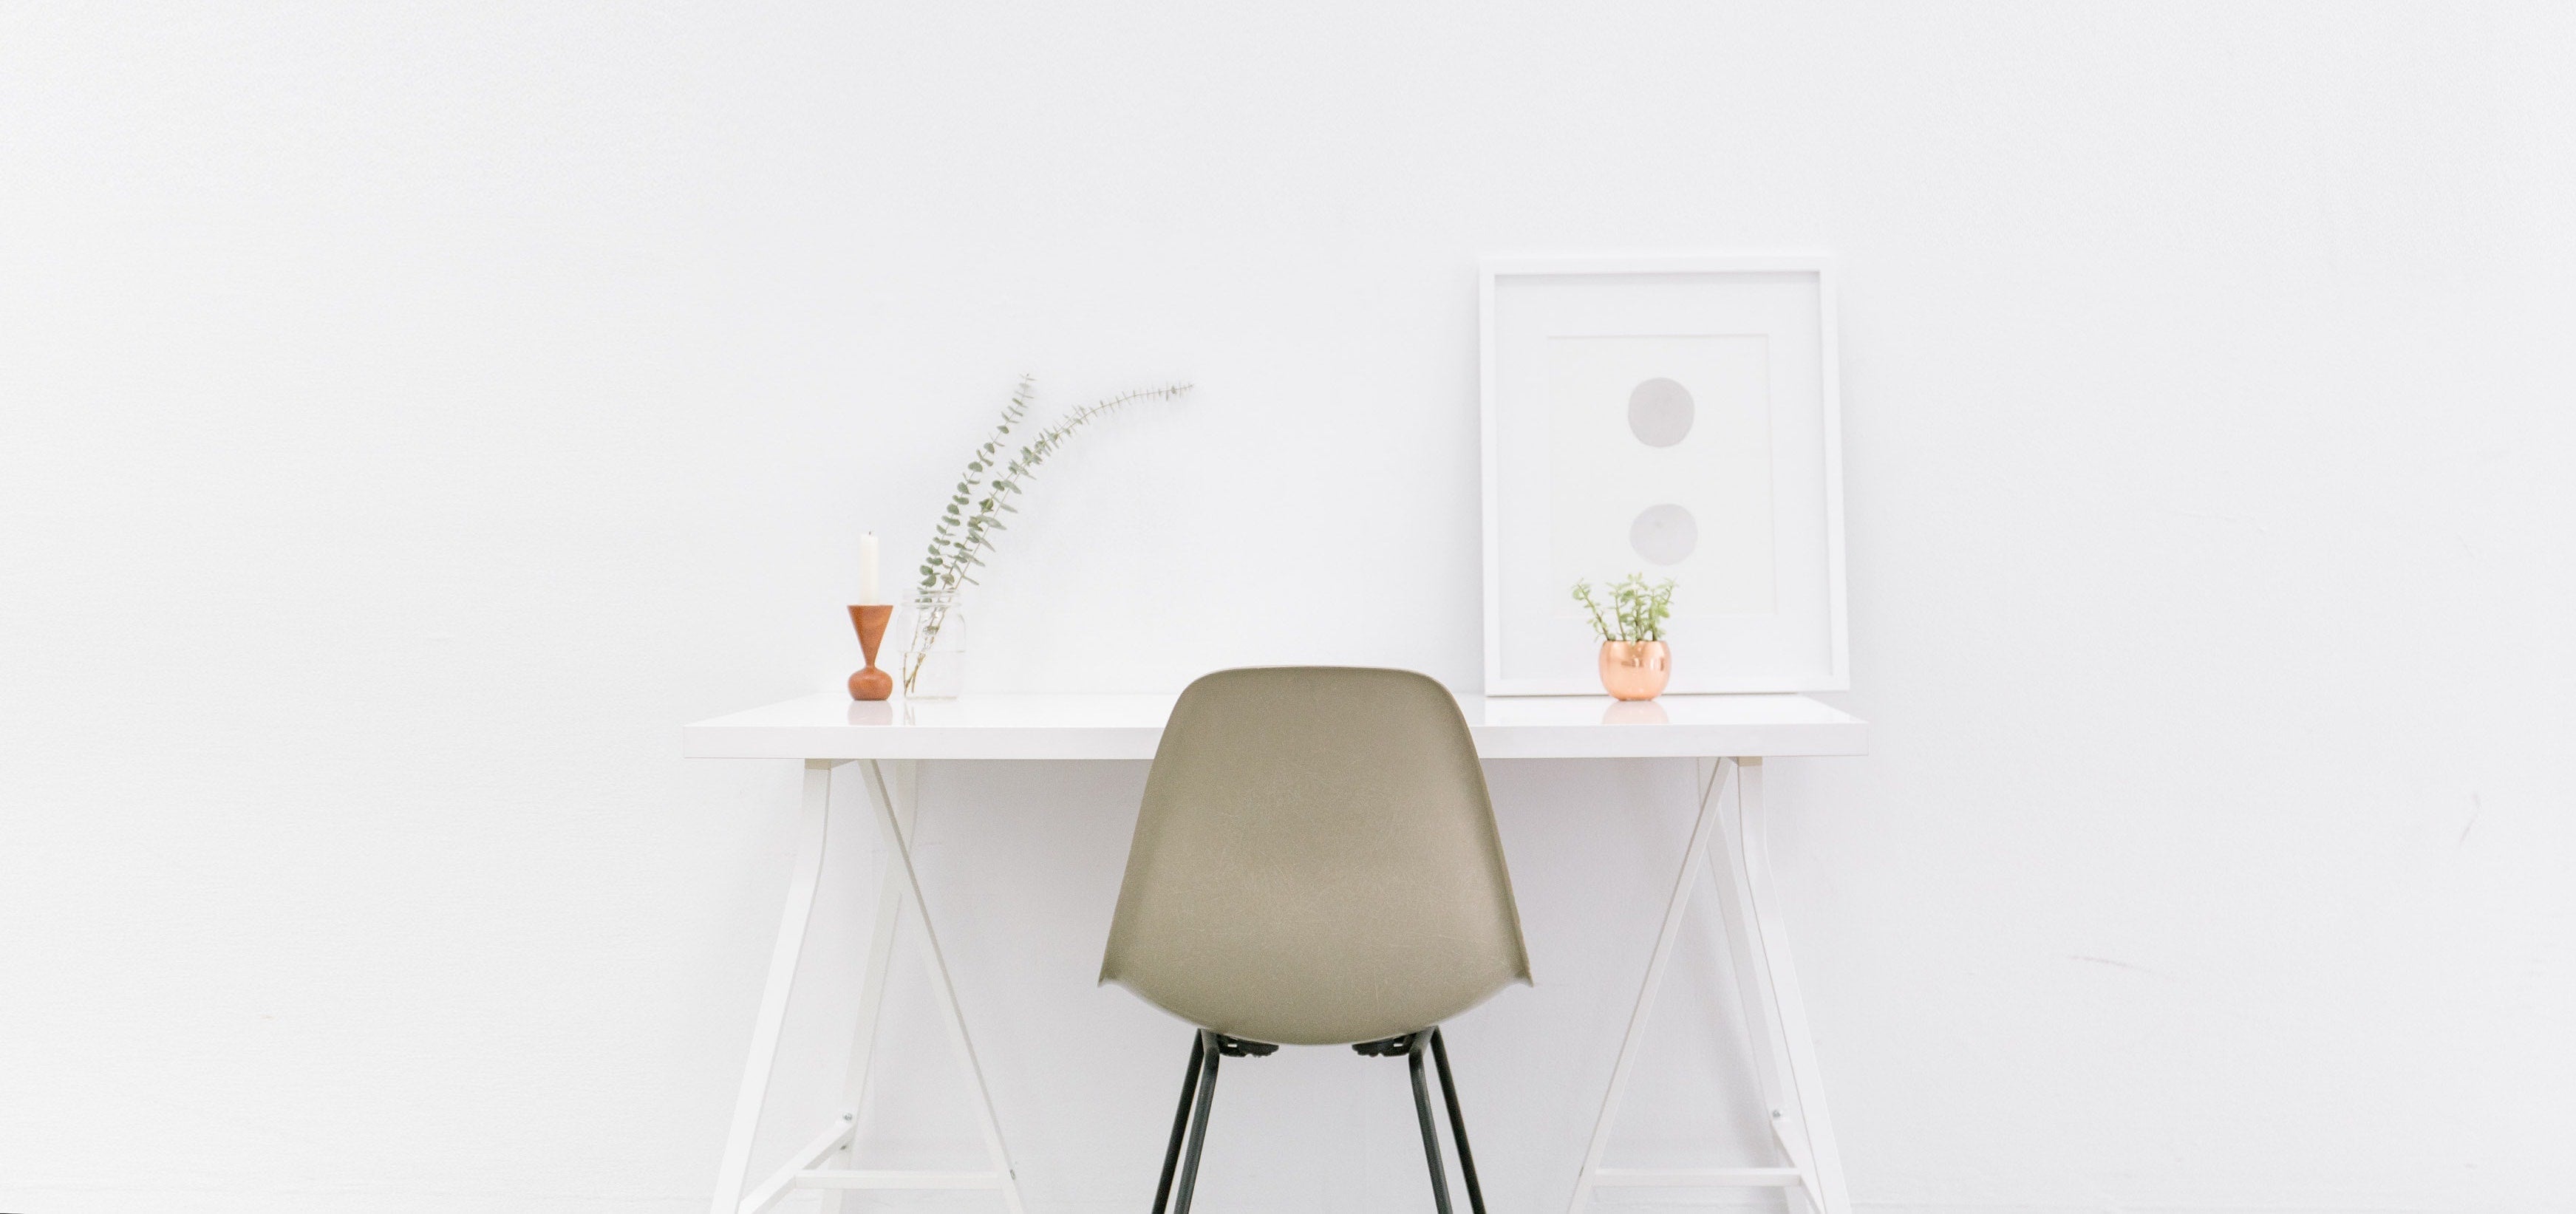 Feng Shui - Why you need to follow It in these 5 Simple Ways